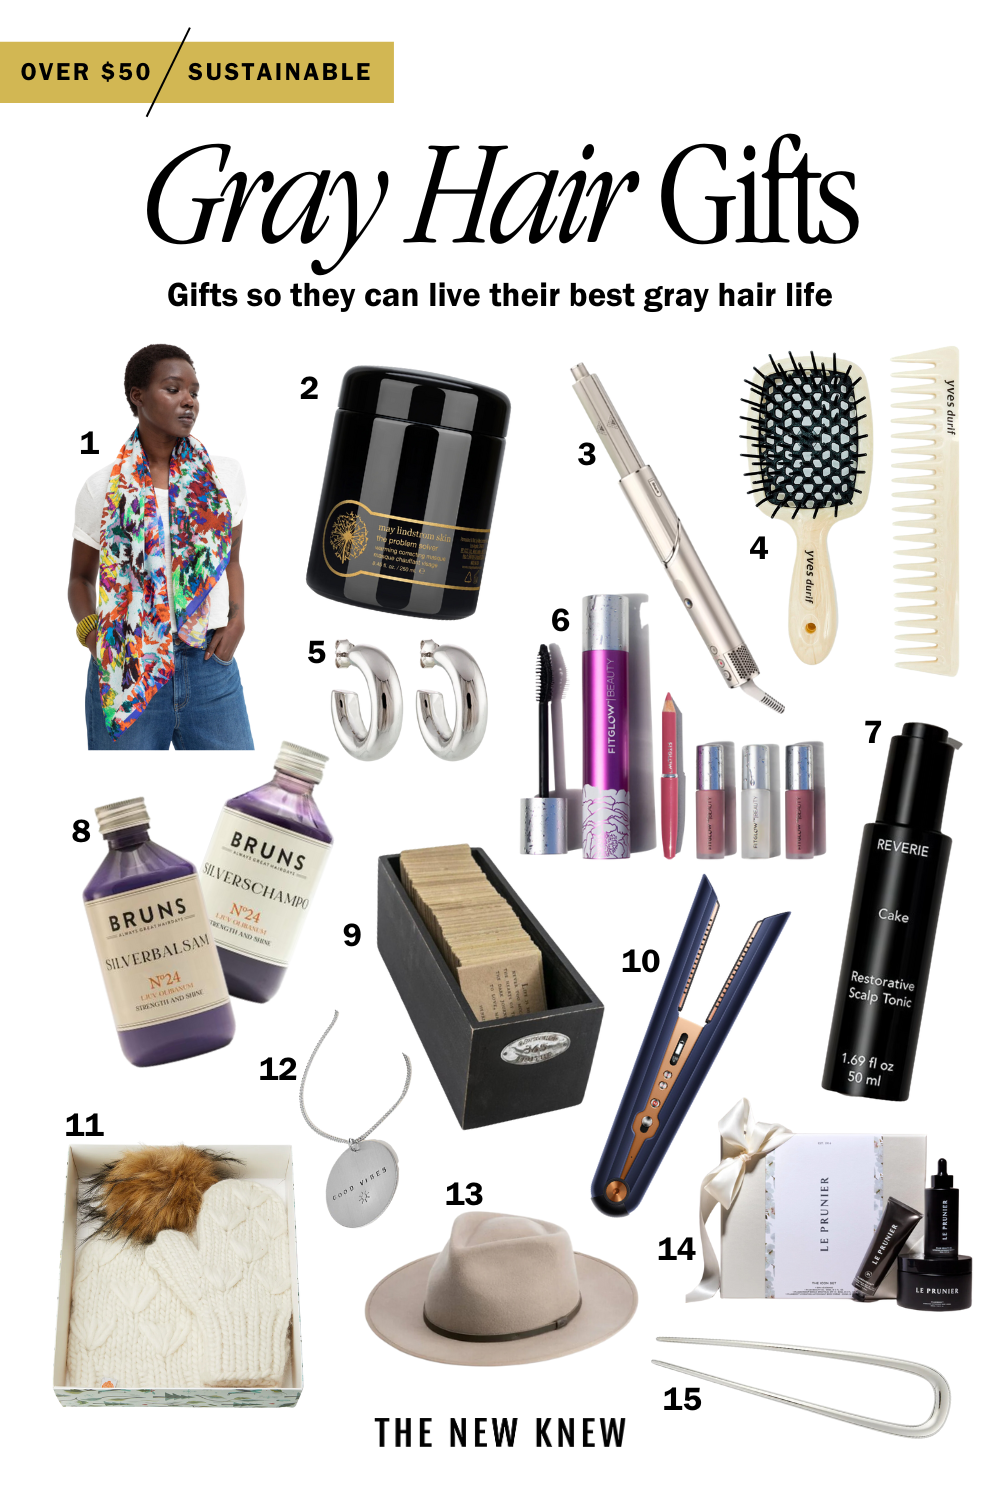 A collection of gray hair gifts over $50. 